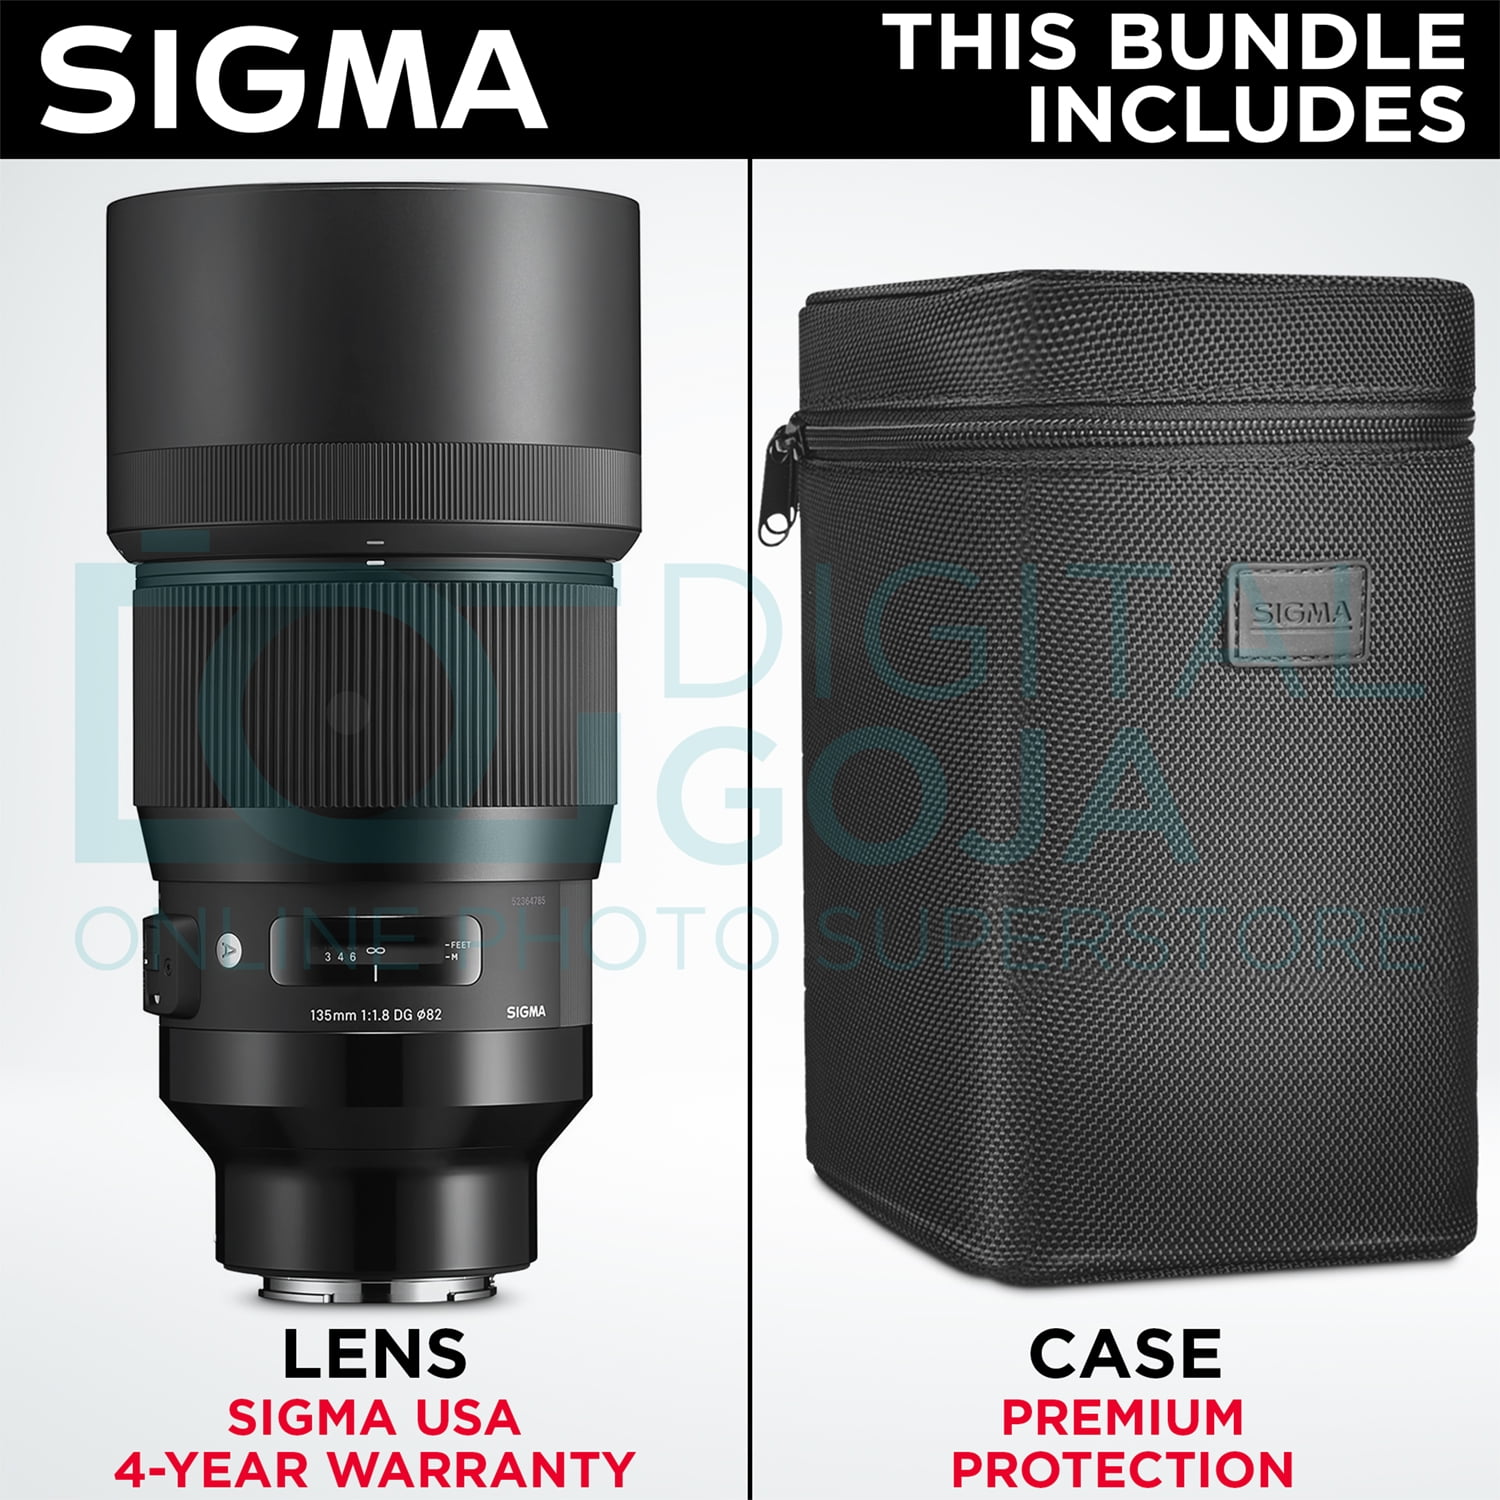 Sigma 135mm f/1.8 DG HSM Art Lens for Sony E Mount Cameras with Altura Photo Advanced Accessory and Travel Bundle 